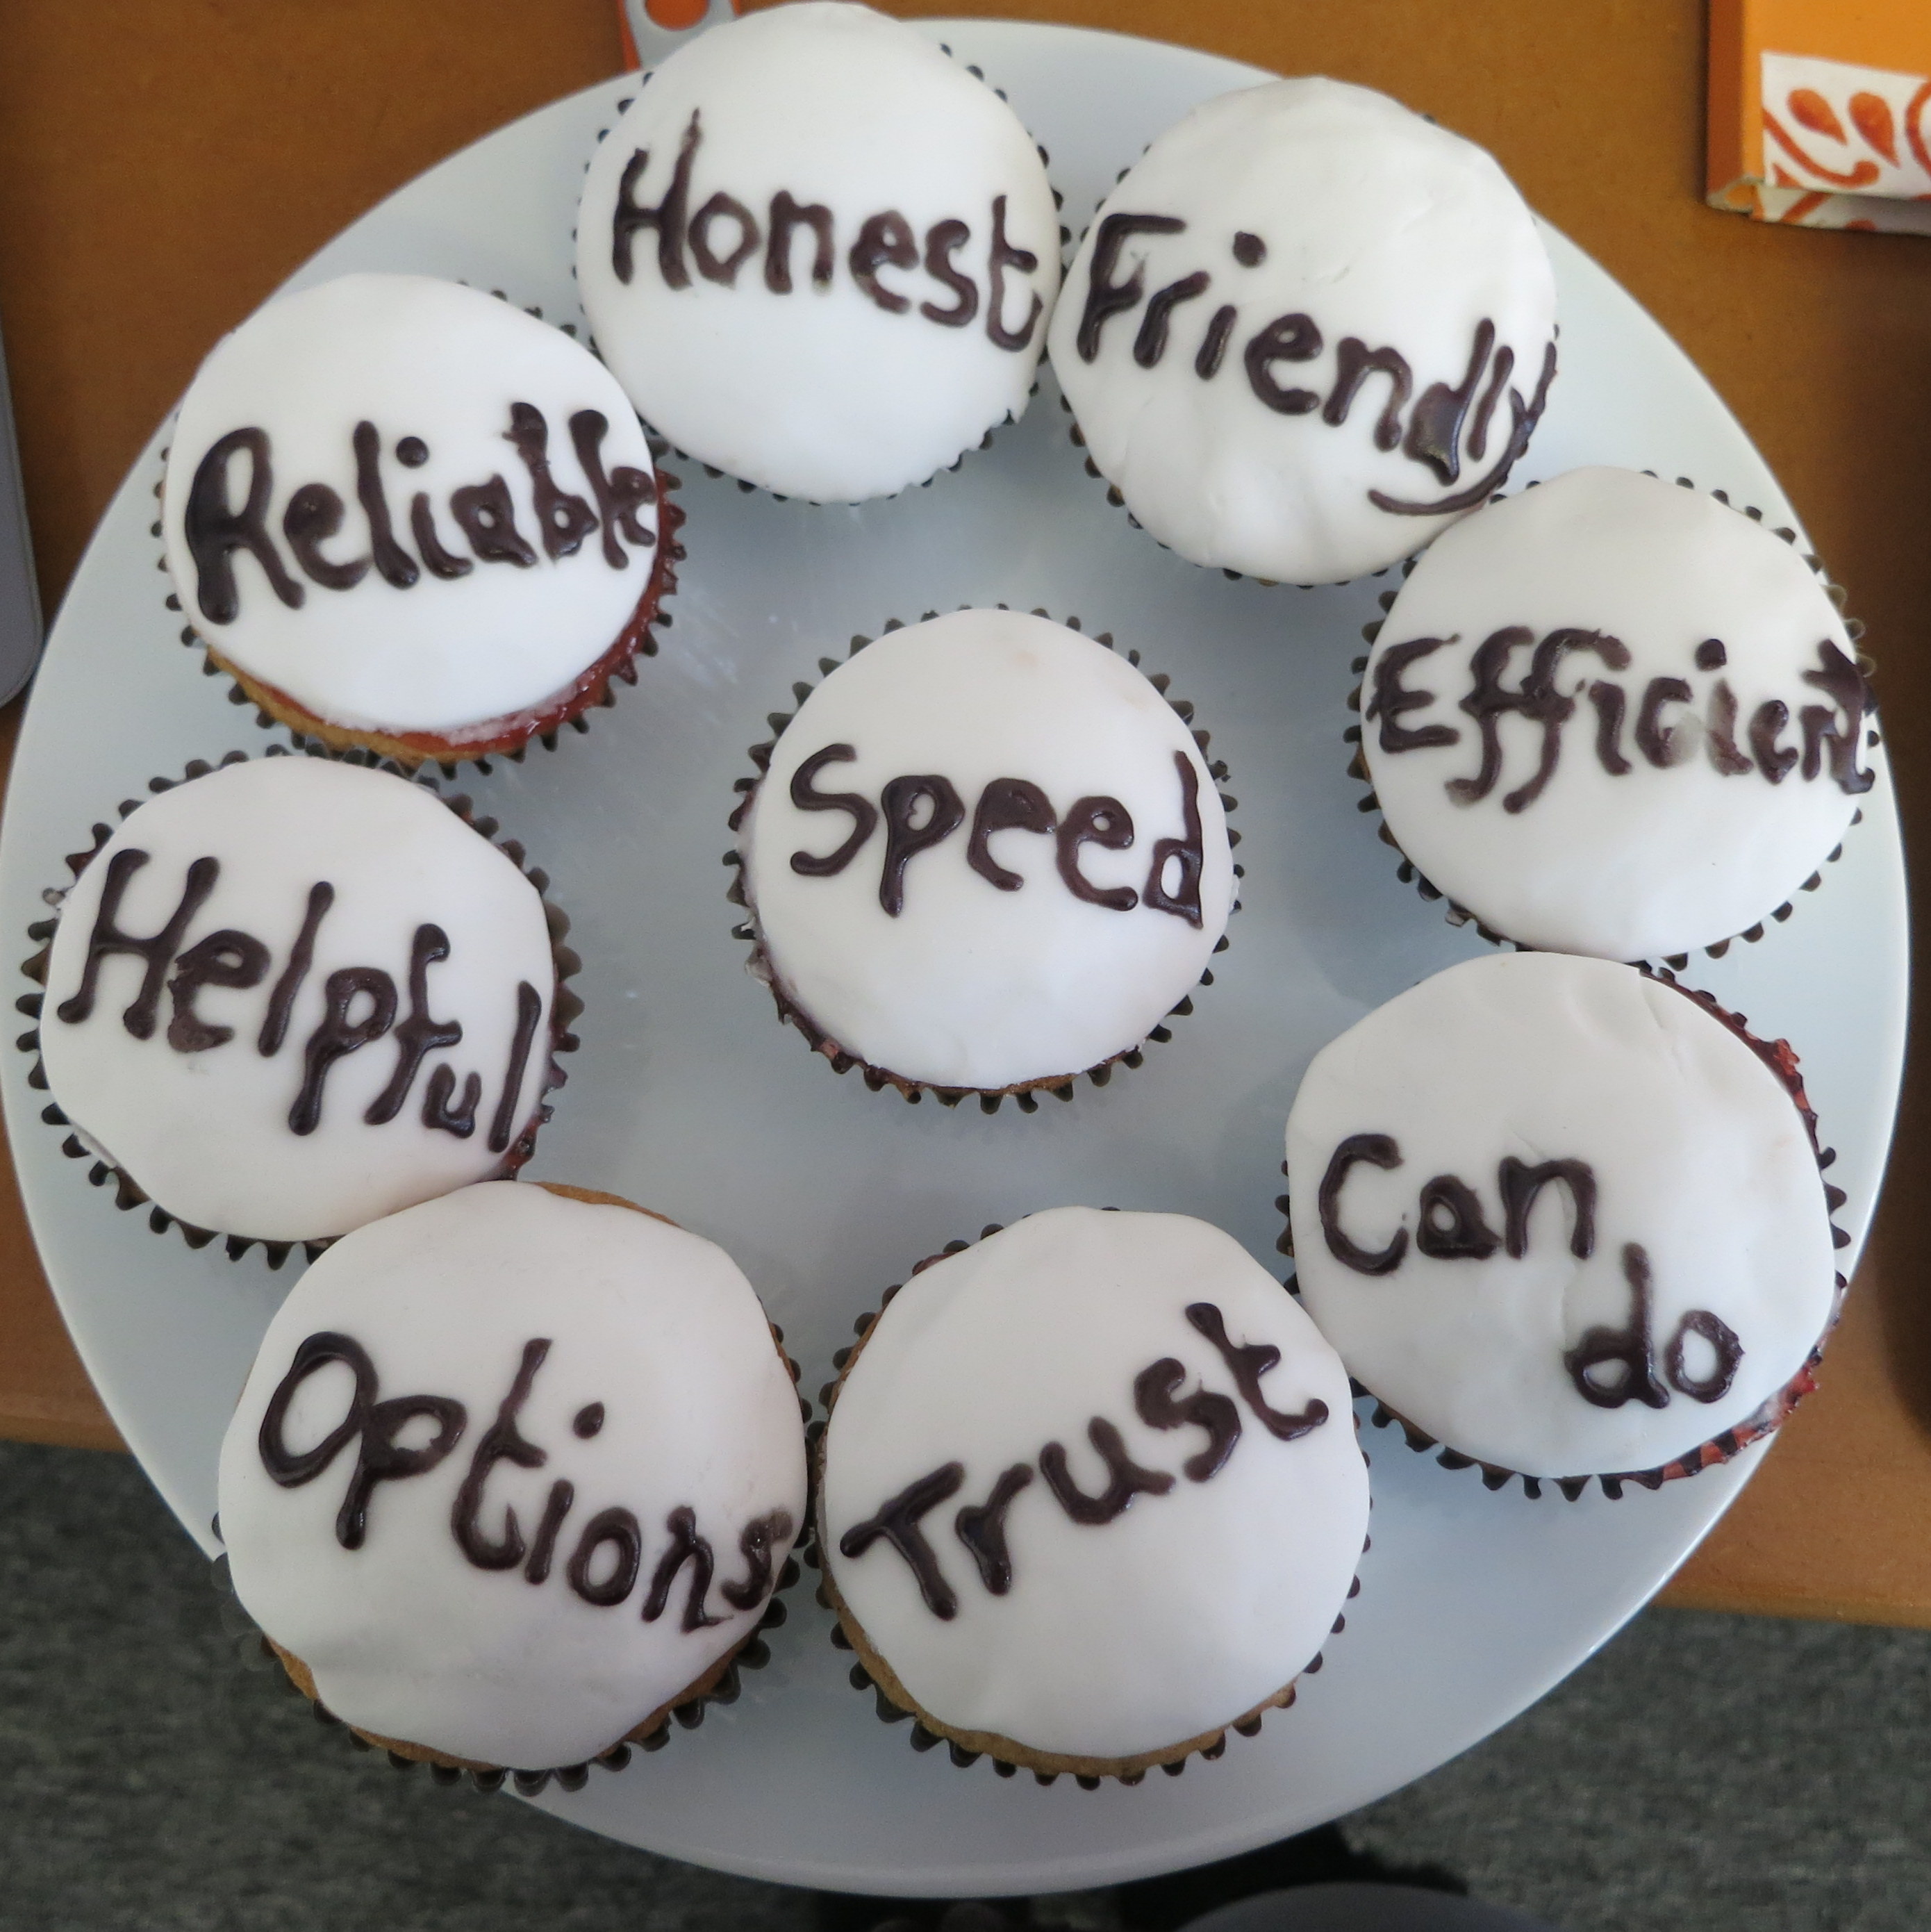 Say it with cakes - great customer service